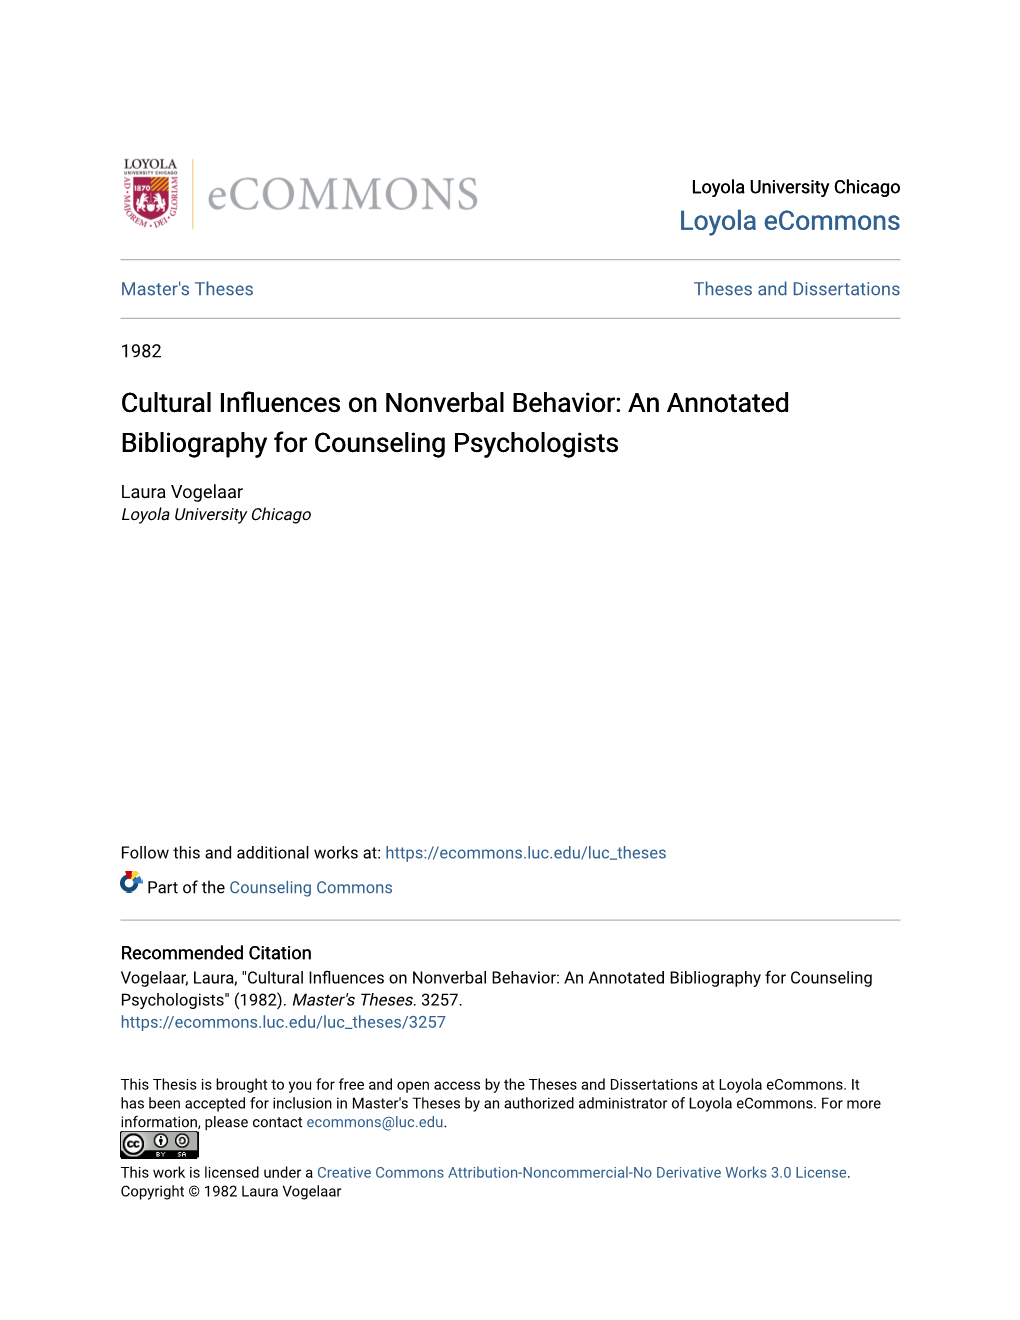 An Annotated Bibliography for Counseling Psychologists